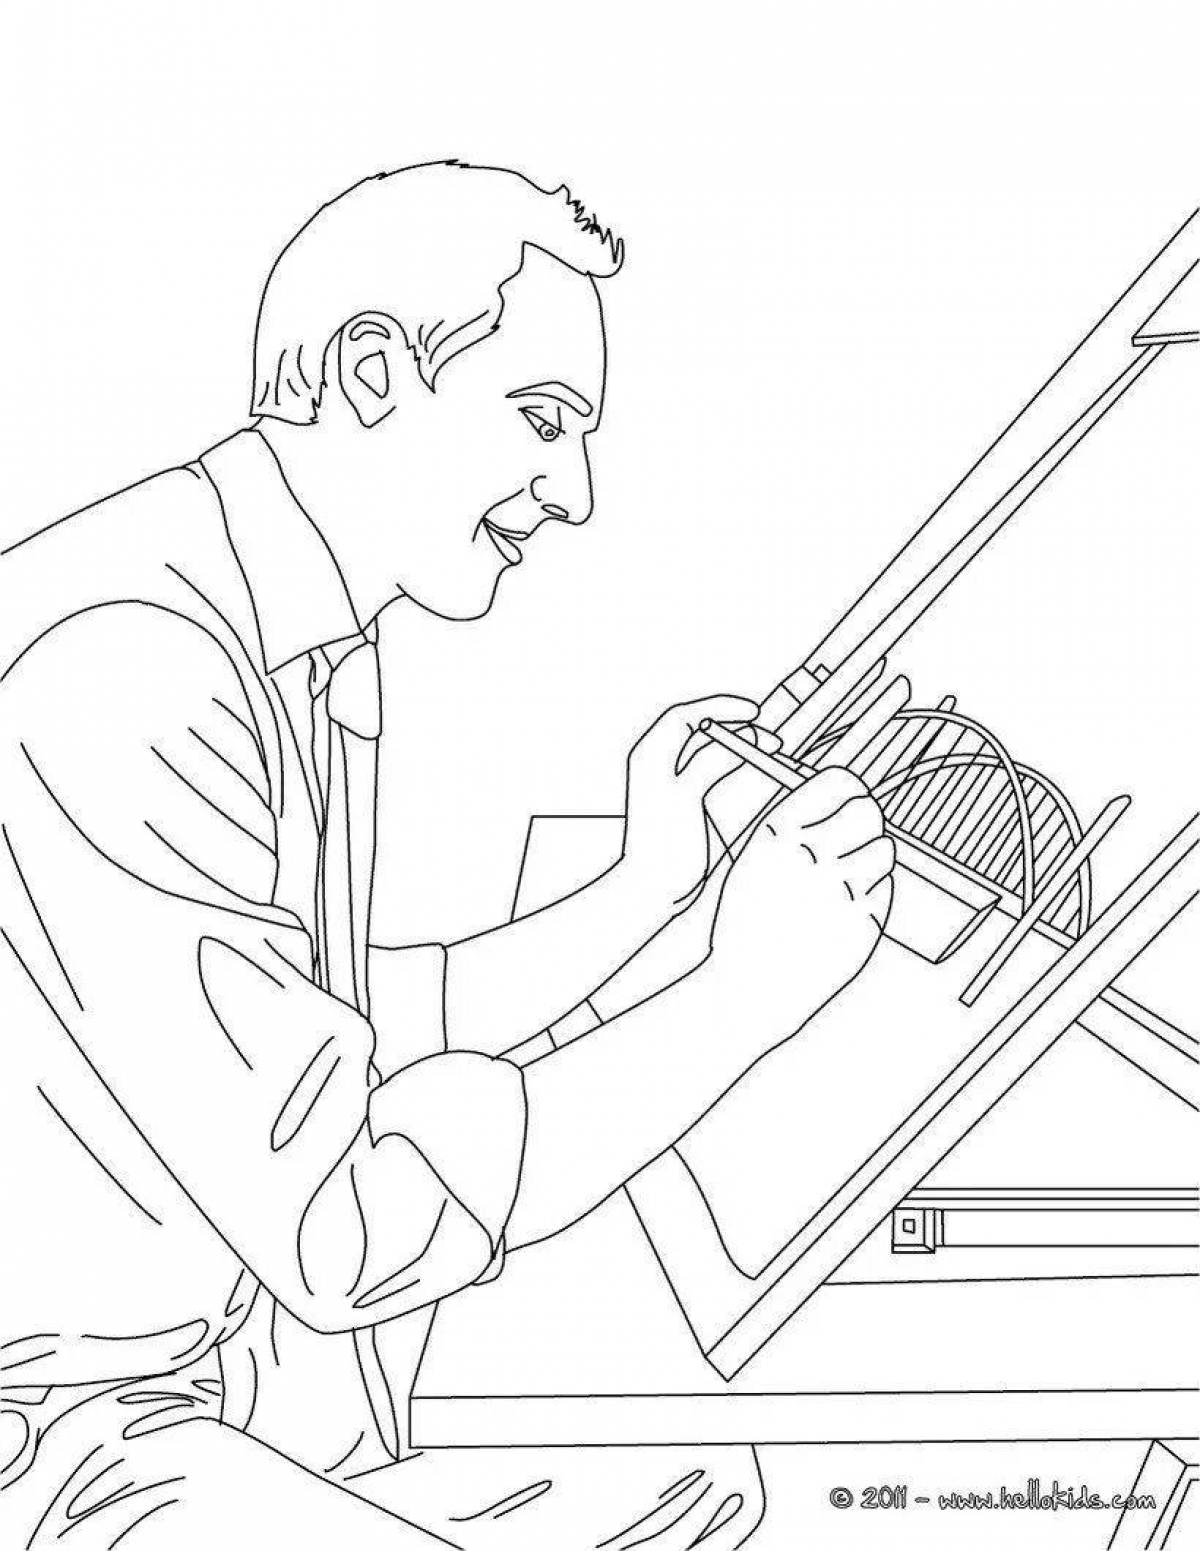 Insightful Engineer coloring page